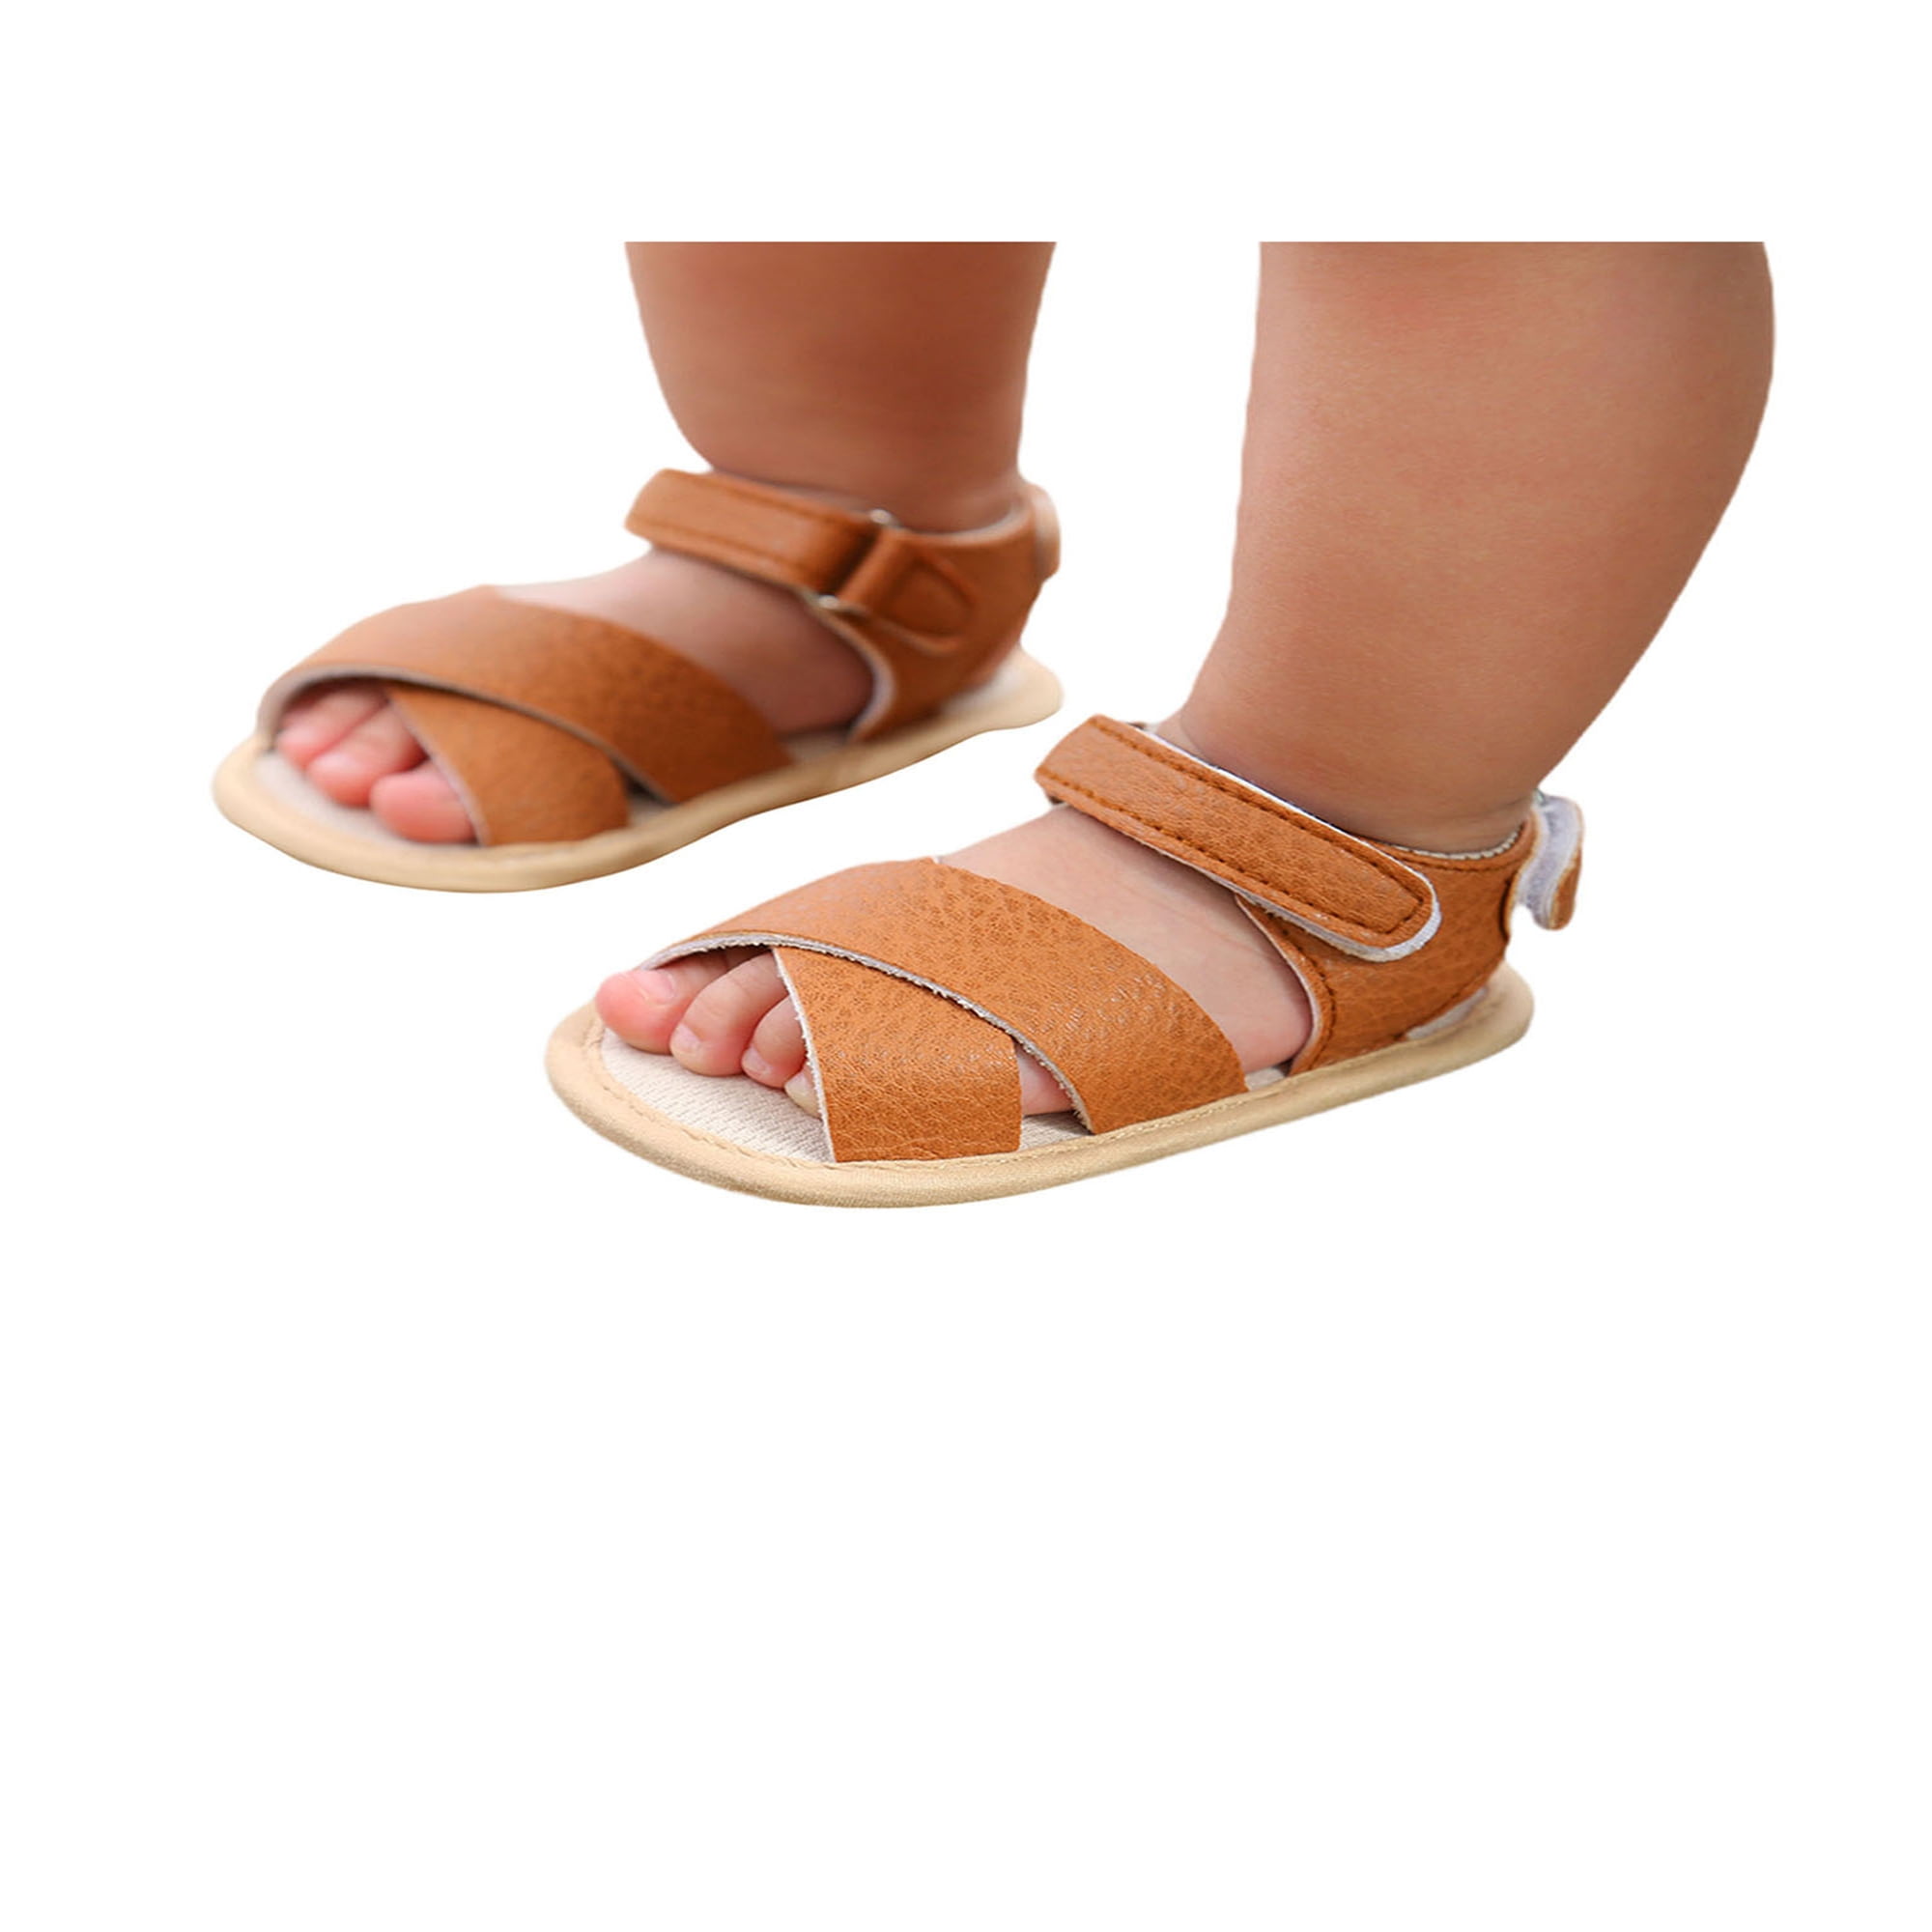 Baby Boys and Girls Summer Unisex Kids Leather Sandals Anti-Slip Rubber Sole Outdoor